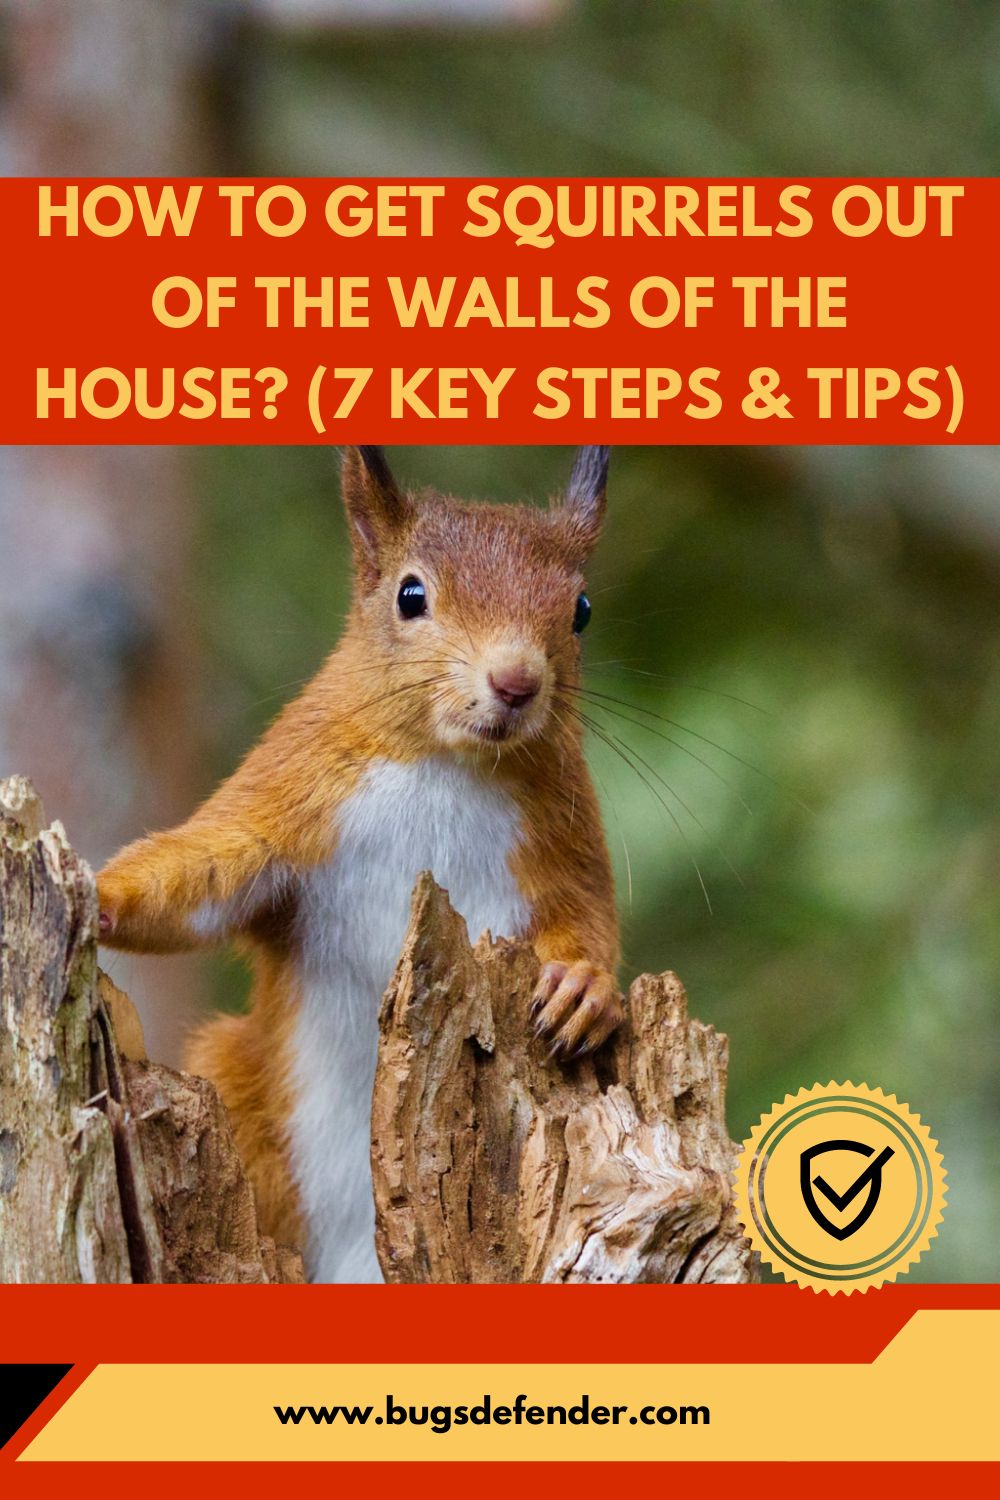 How To Get Squirrels Out of the Walls of the House? (7 Key Steps & Tips) pin 2